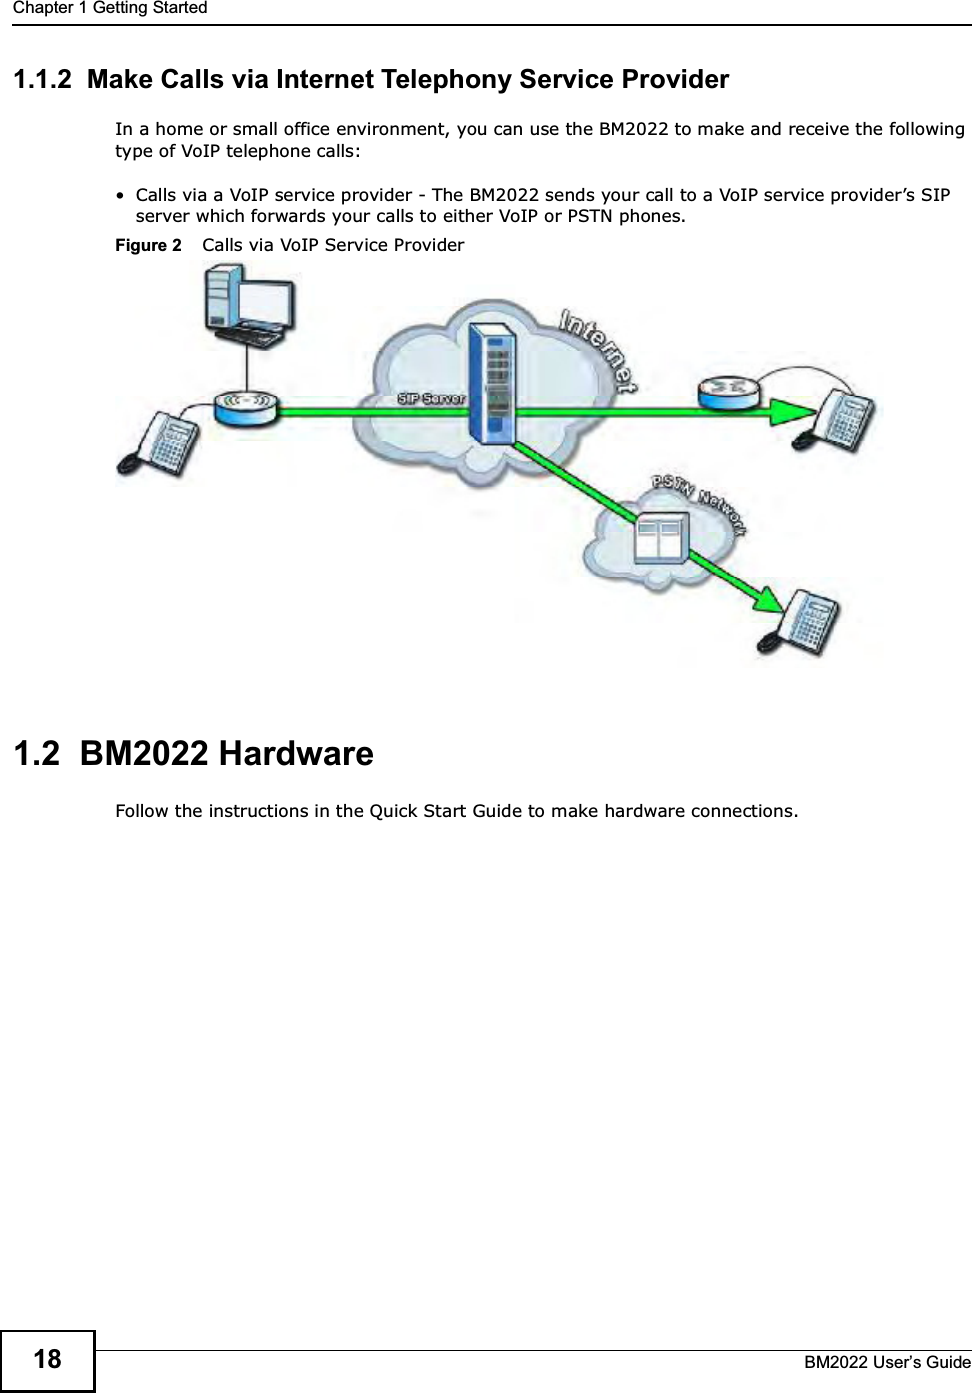 Chapter 1 Getting StartedBM2022 Users Guide181.1.2  Make Calls via Internet Telephony Service ProviderIn a home or small office environment, you can use the BM2022 to make and receive the following type of VoIP telephone calls: Calls via a VoIP service provider - The BM2022 sends your call to a VoIP service providers SIP server which forwards your calls to either VoIP or PSTN phones.Figure 2    Calls via VoIP Service Provider1.2  BM2022 HardwareFollow the instructions in the Quick Start Guide to make hardware connections.